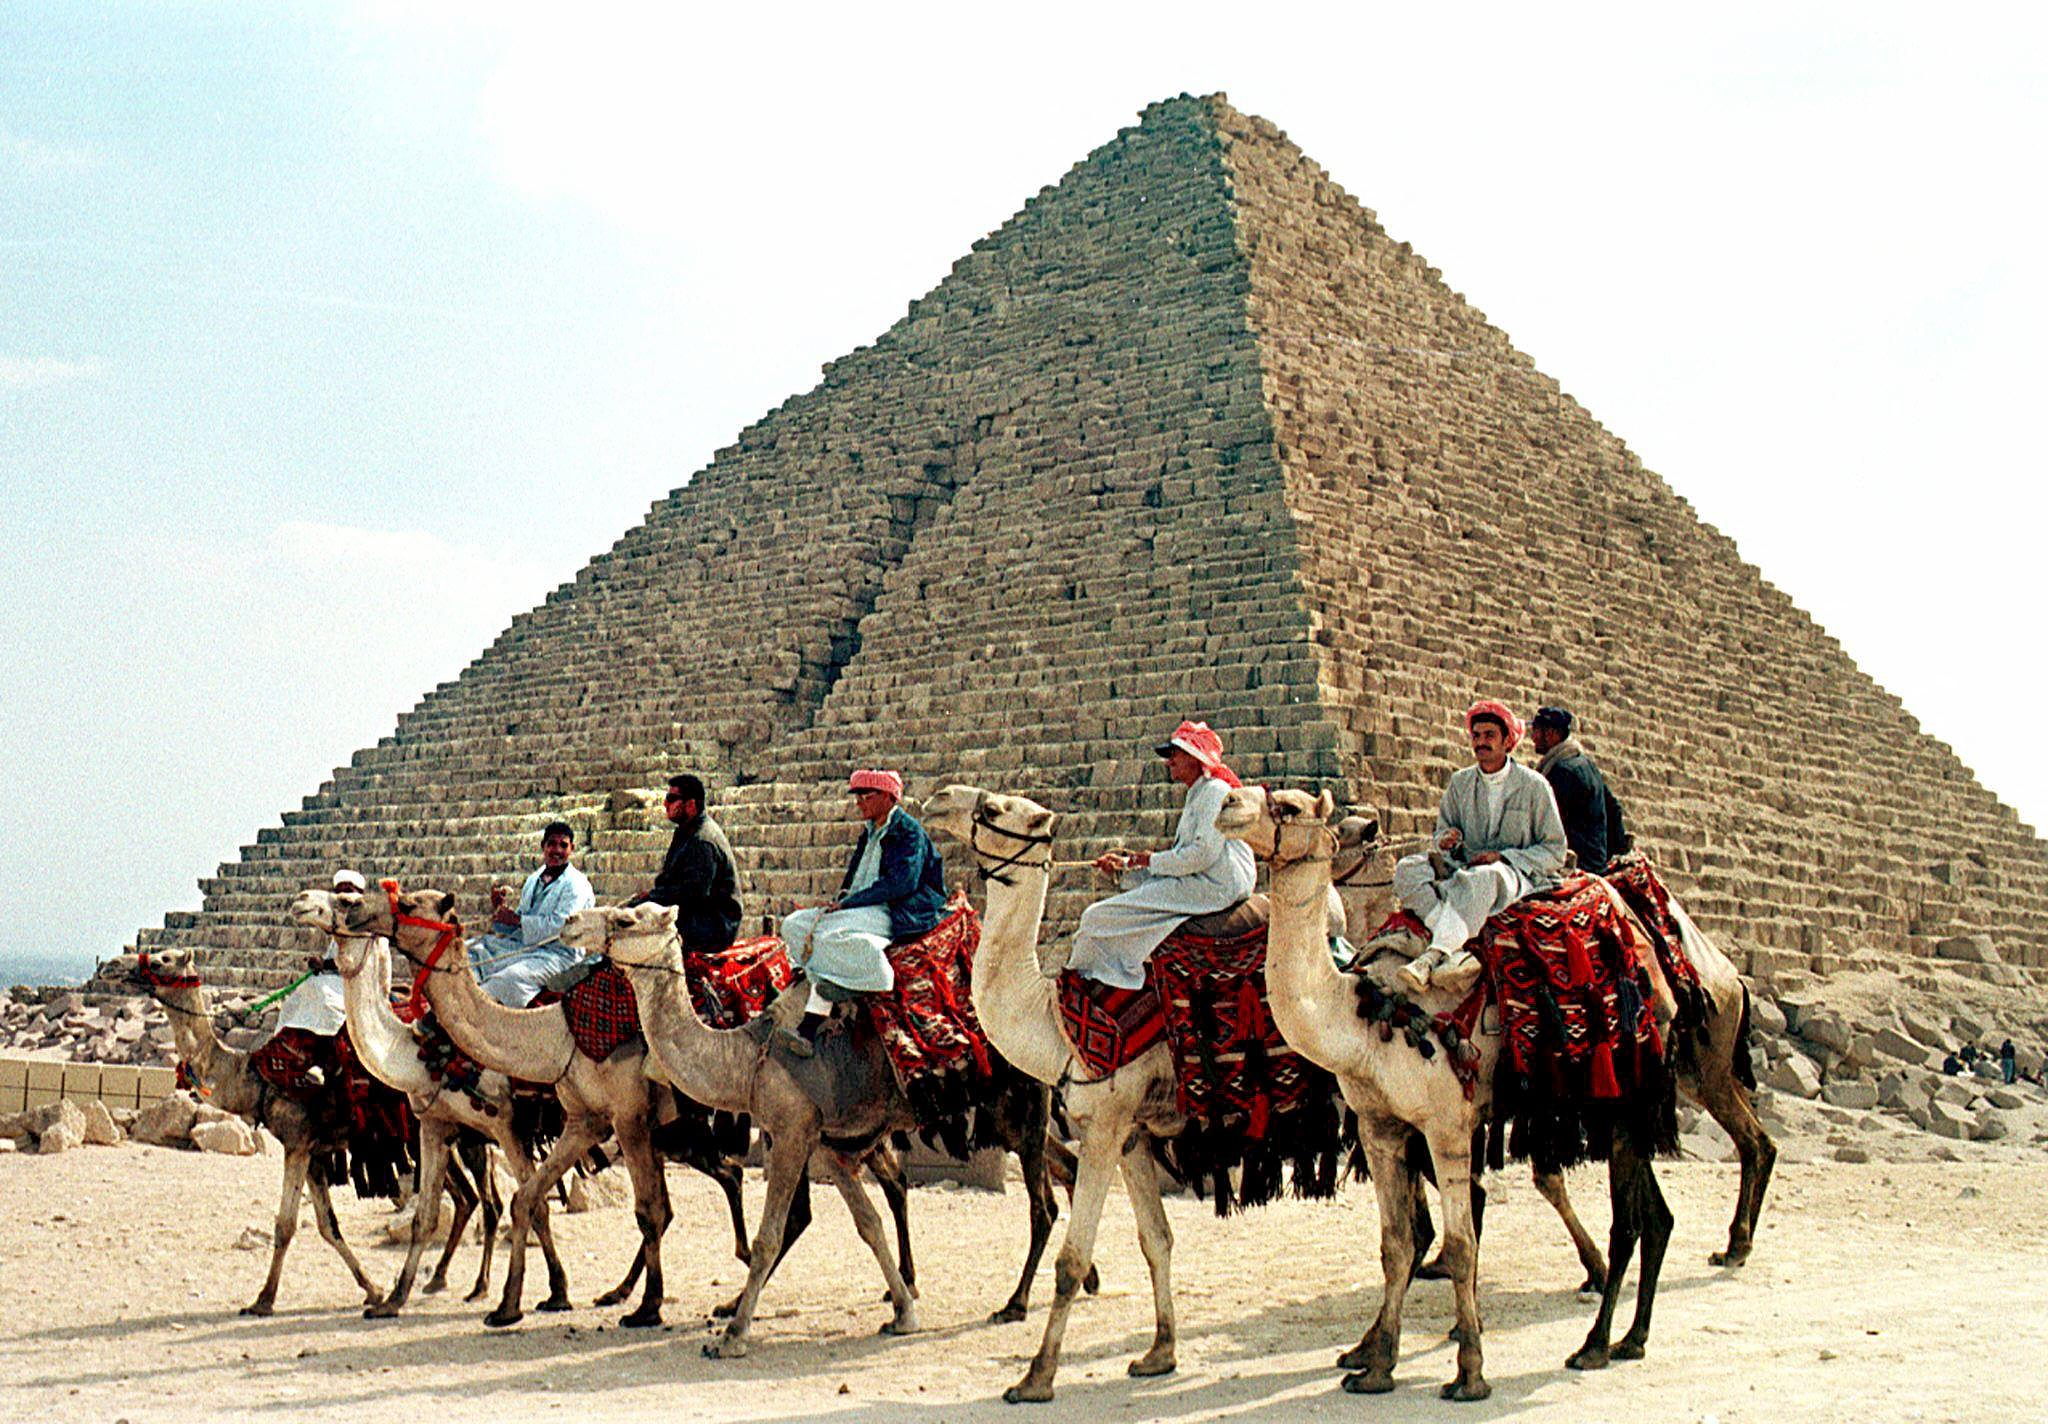 Egypt: a project to renovate a pyramid sparks controversy